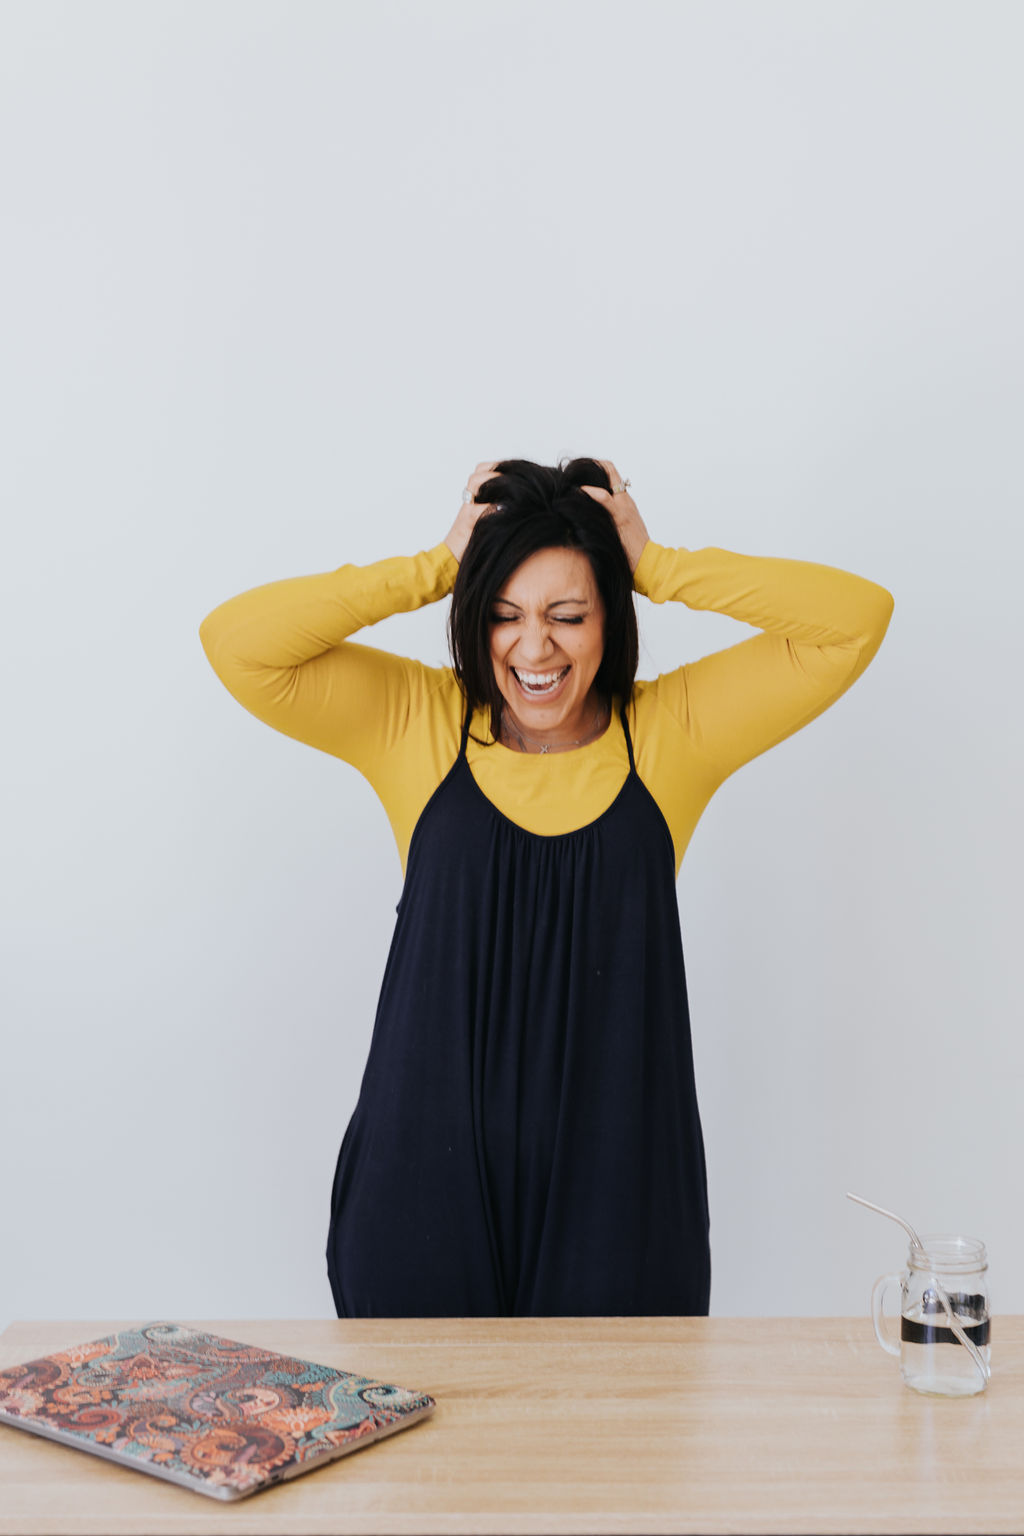 dark haired woman in a black jumper dress with a yellow long-sleeved blouse. She has her hands mussing up her hair and there is a scatterbrained look on her face.